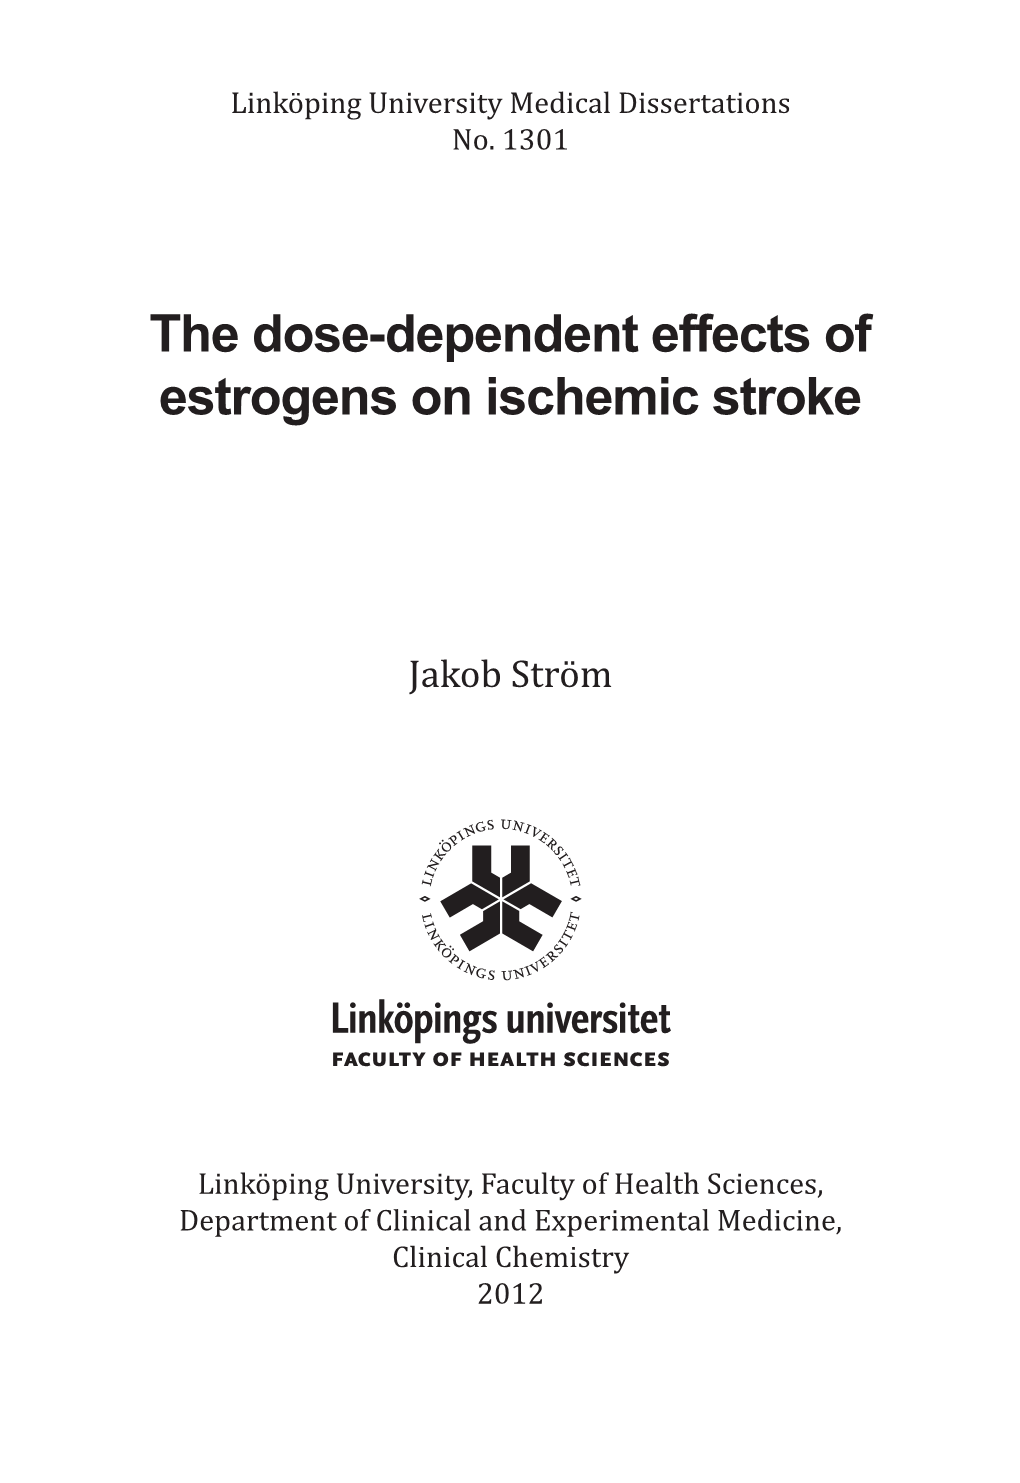 The Dose-Dependent Effects of Estrogens on Ischemic Stroke